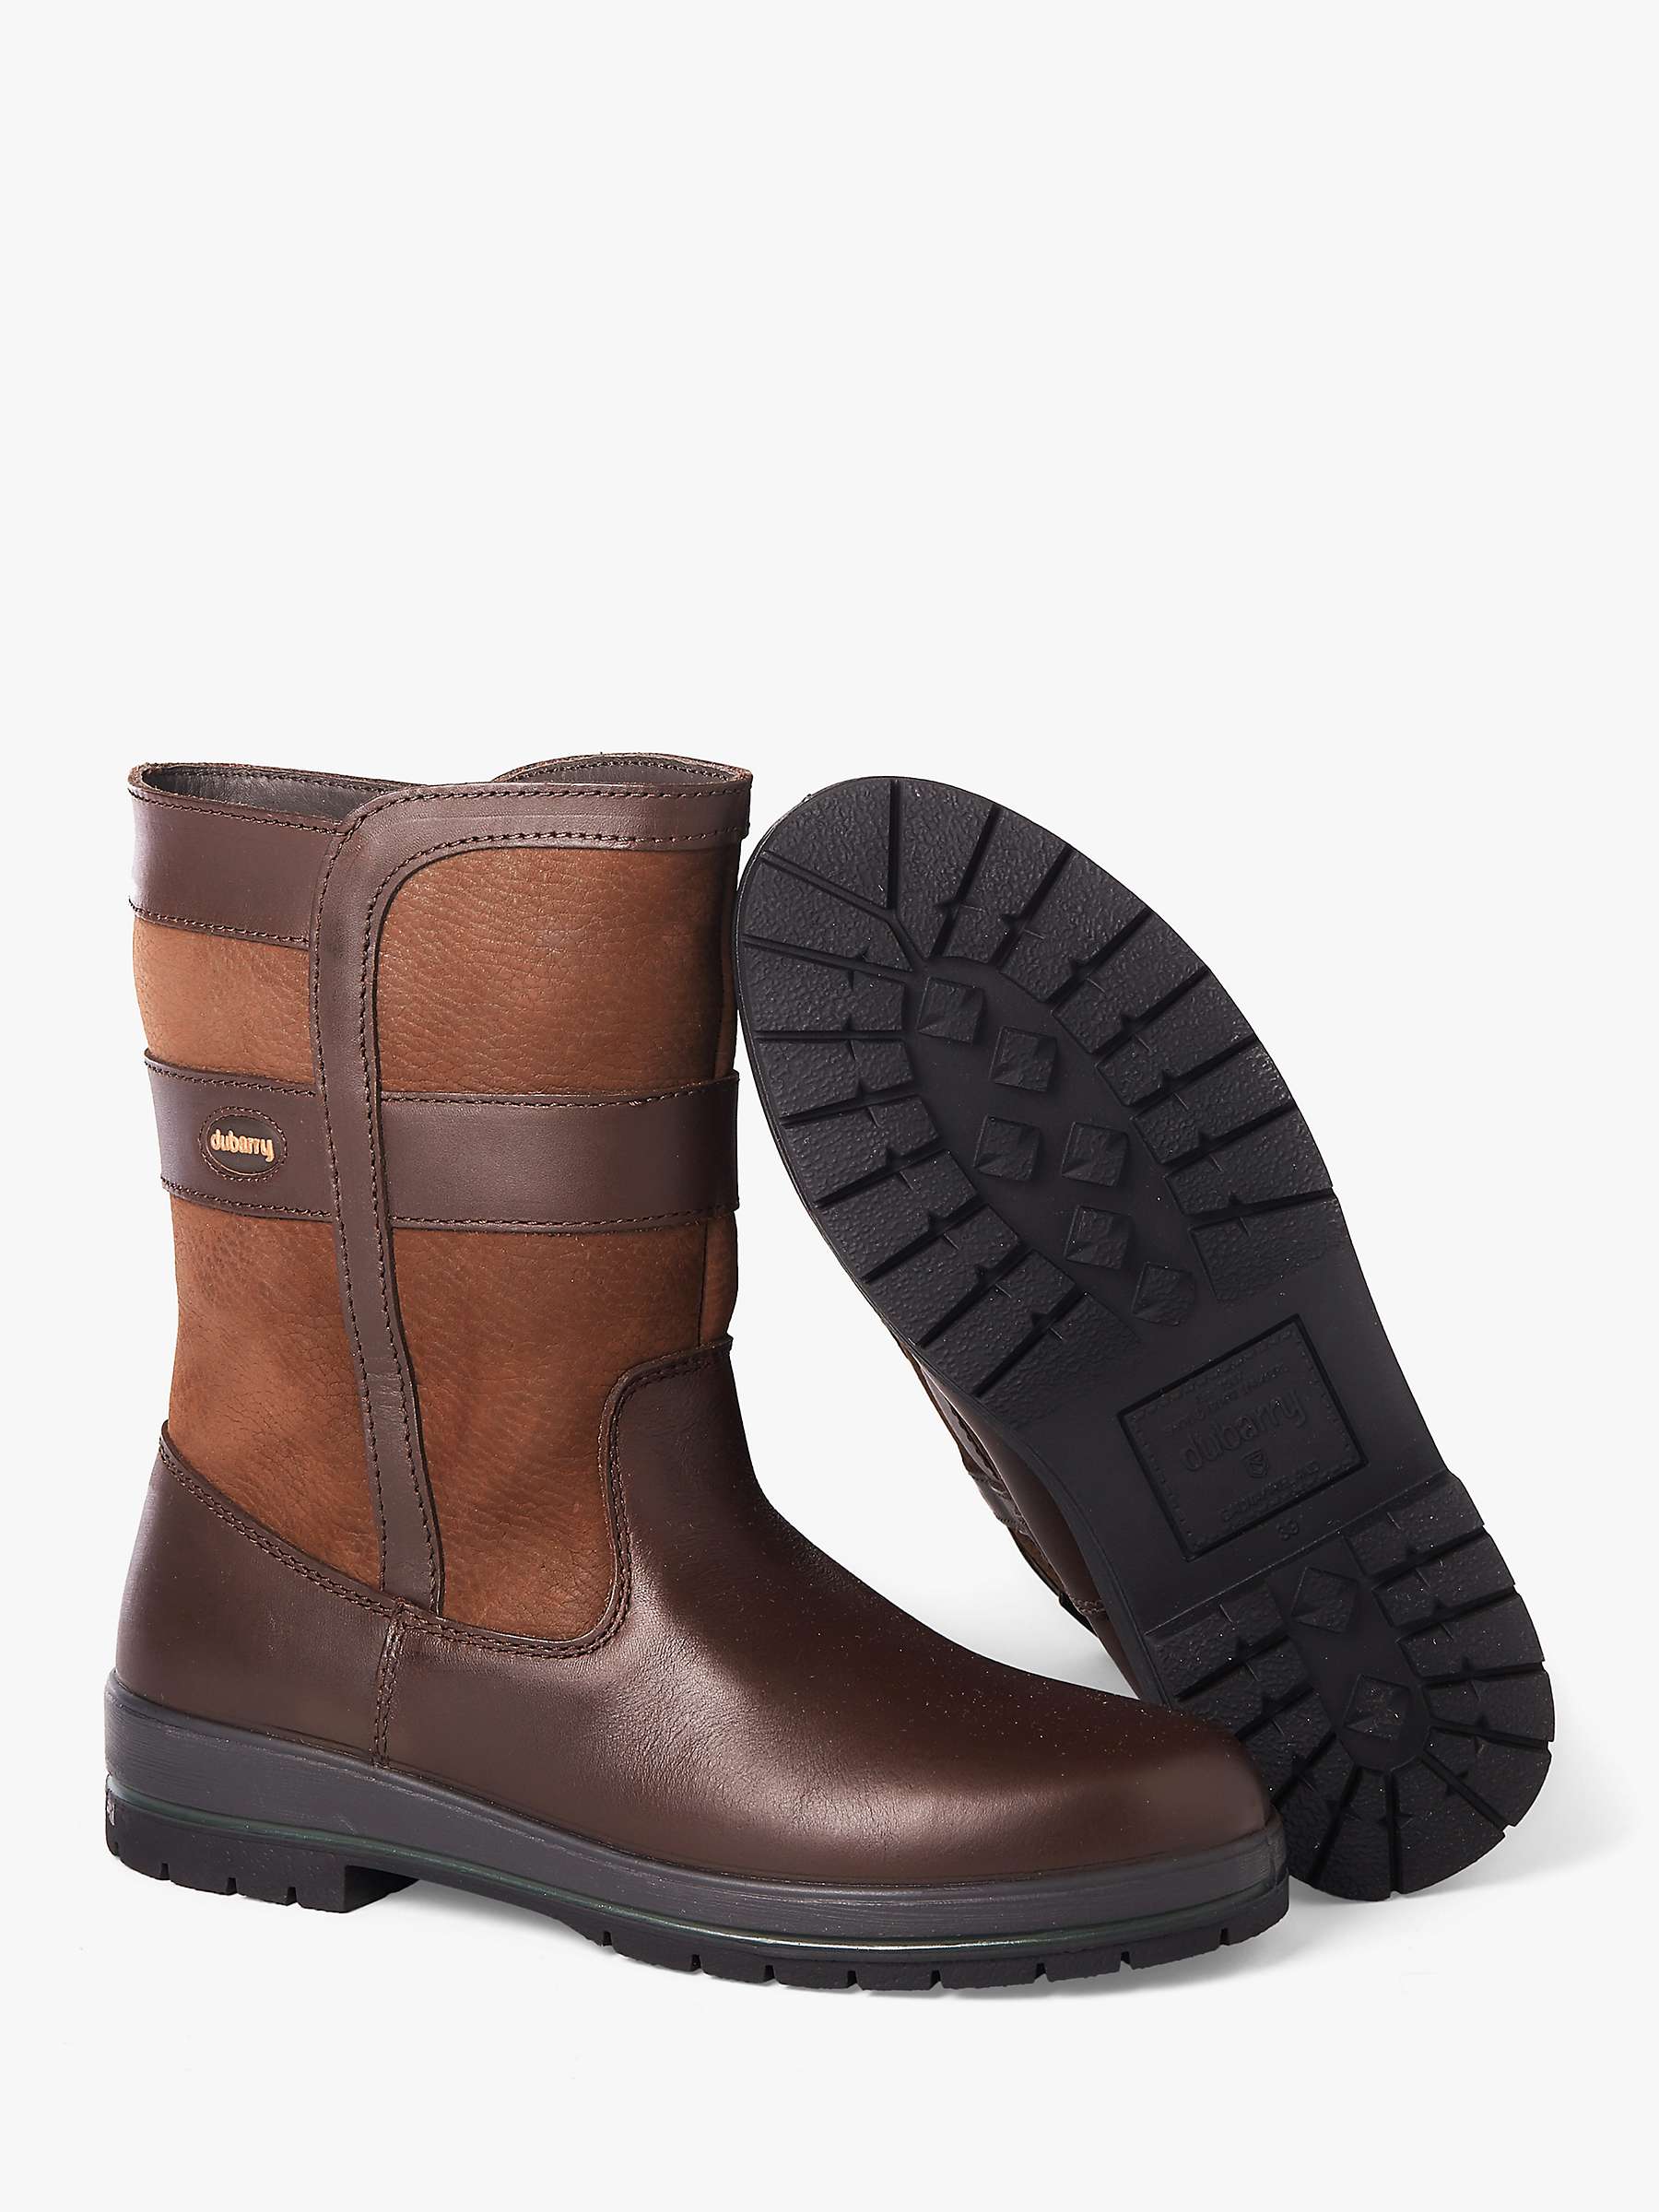 Buy Dubarry Roscommon Leather Ankle Boots, Walnut Online at johnlewis.com